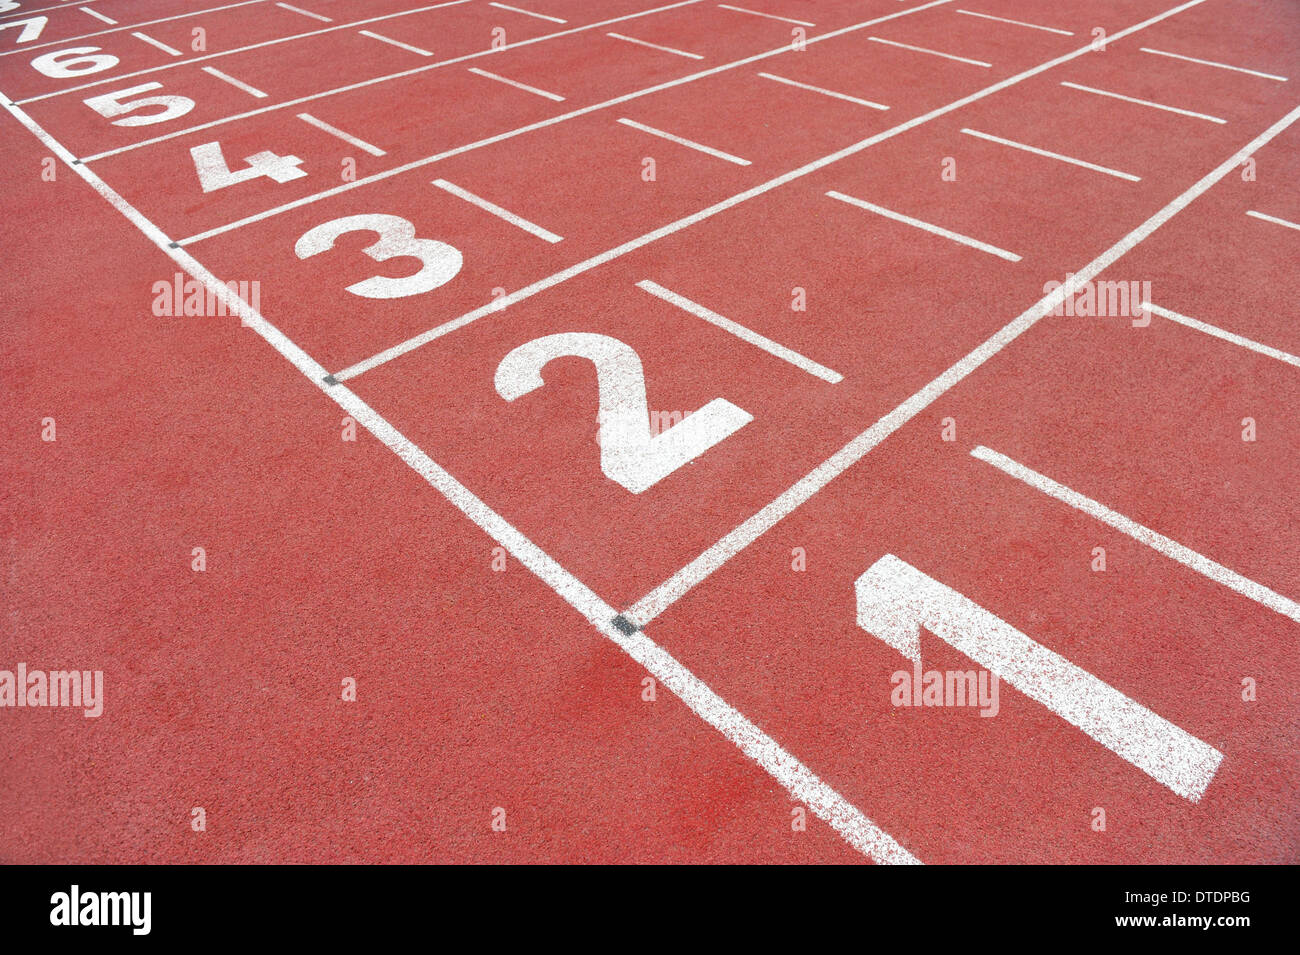 Track and field sprint finish line with no people Stock Photo